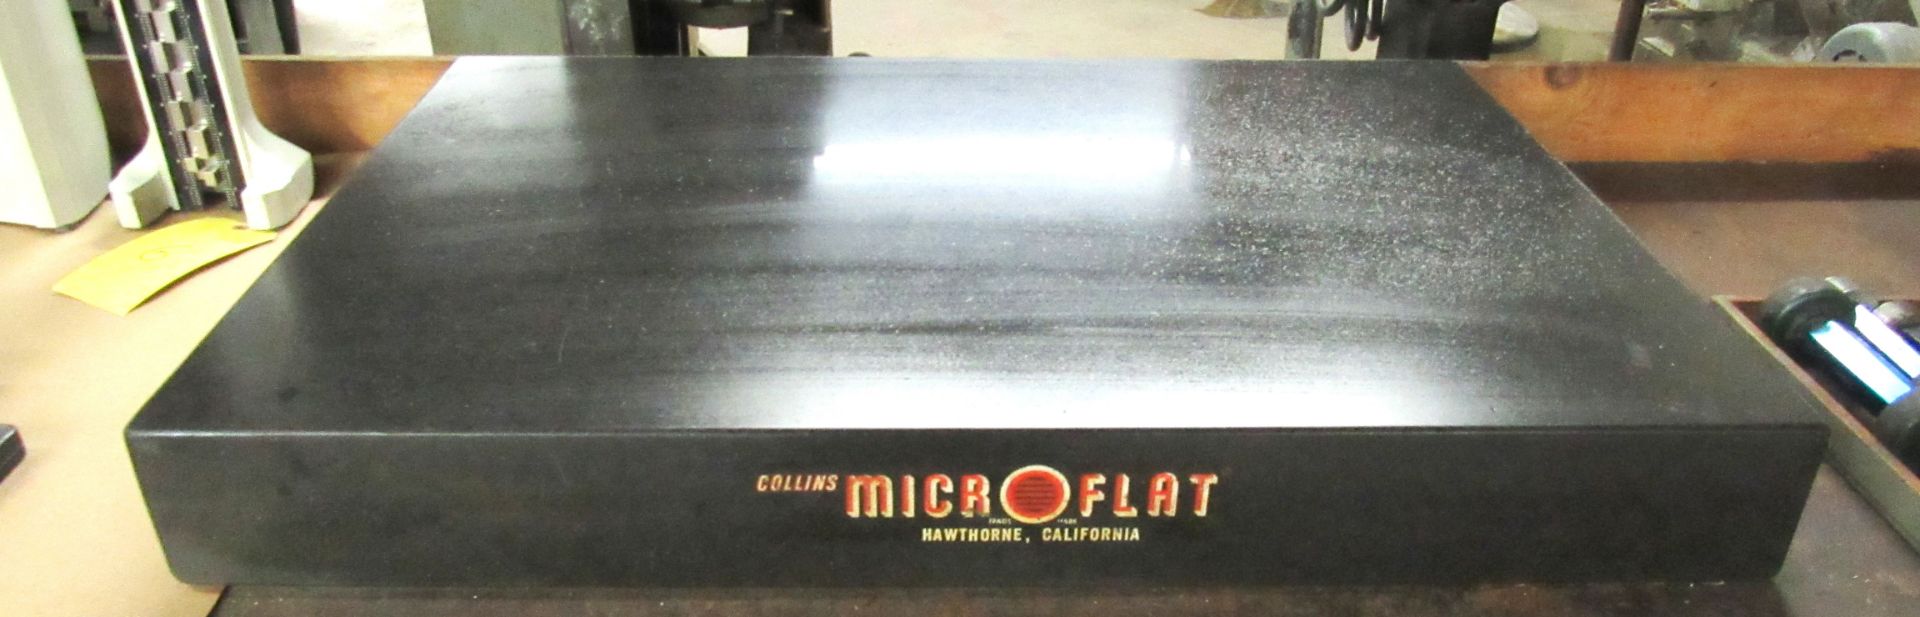 24" x 36" x 4" COLLINS MICROFLAT GRANITE SURFACE PLATE